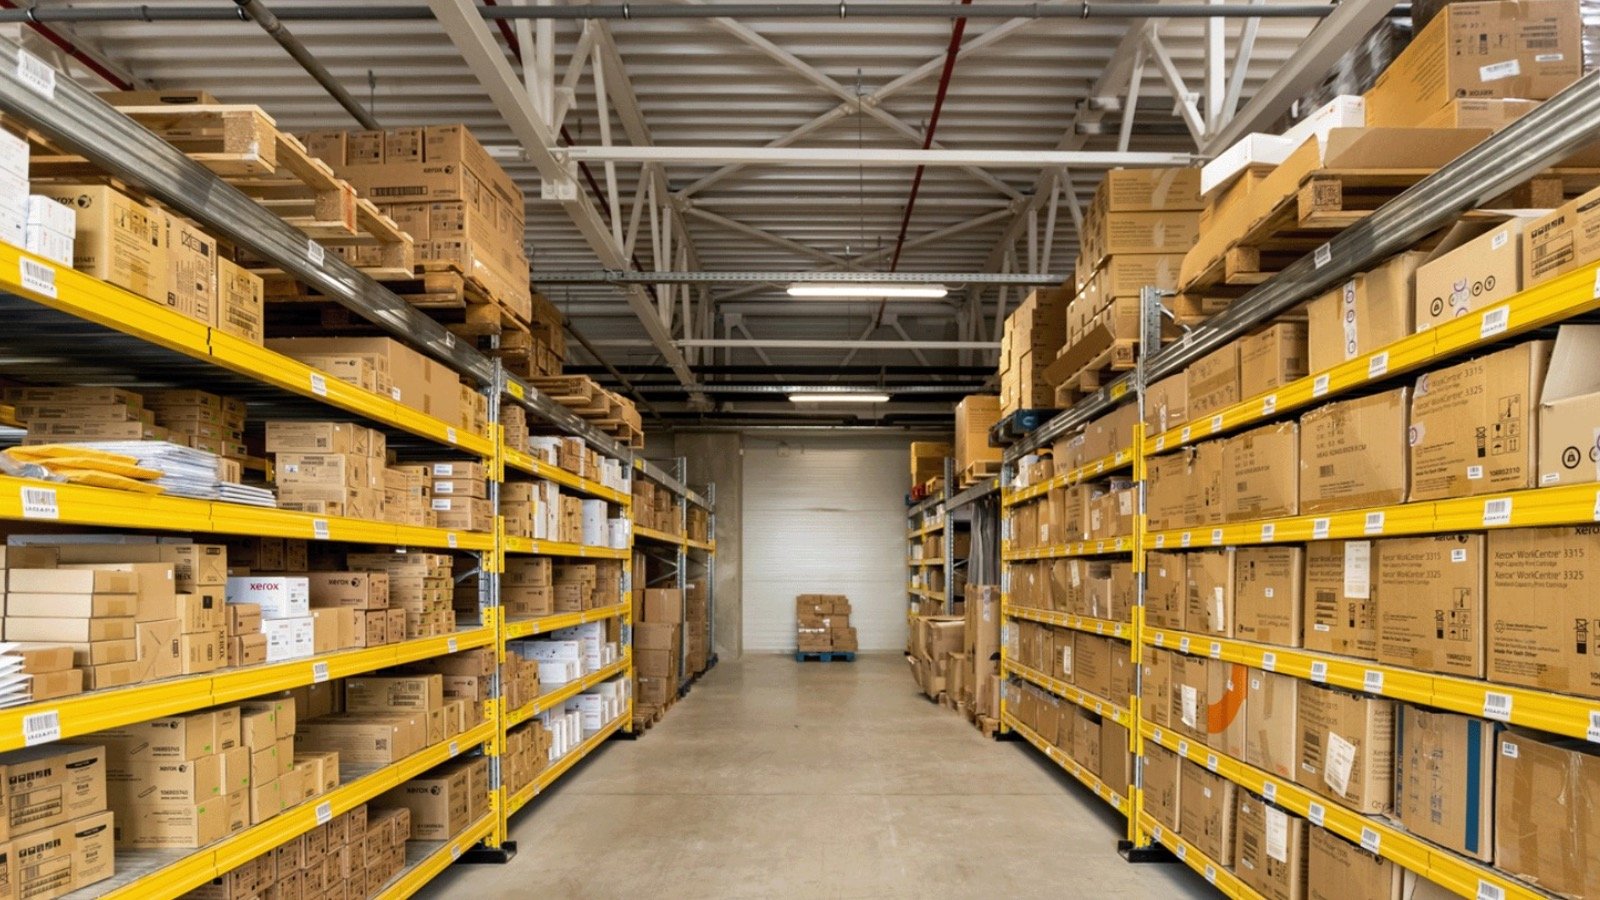 Comparison: Your own warehouse or fulfillment?